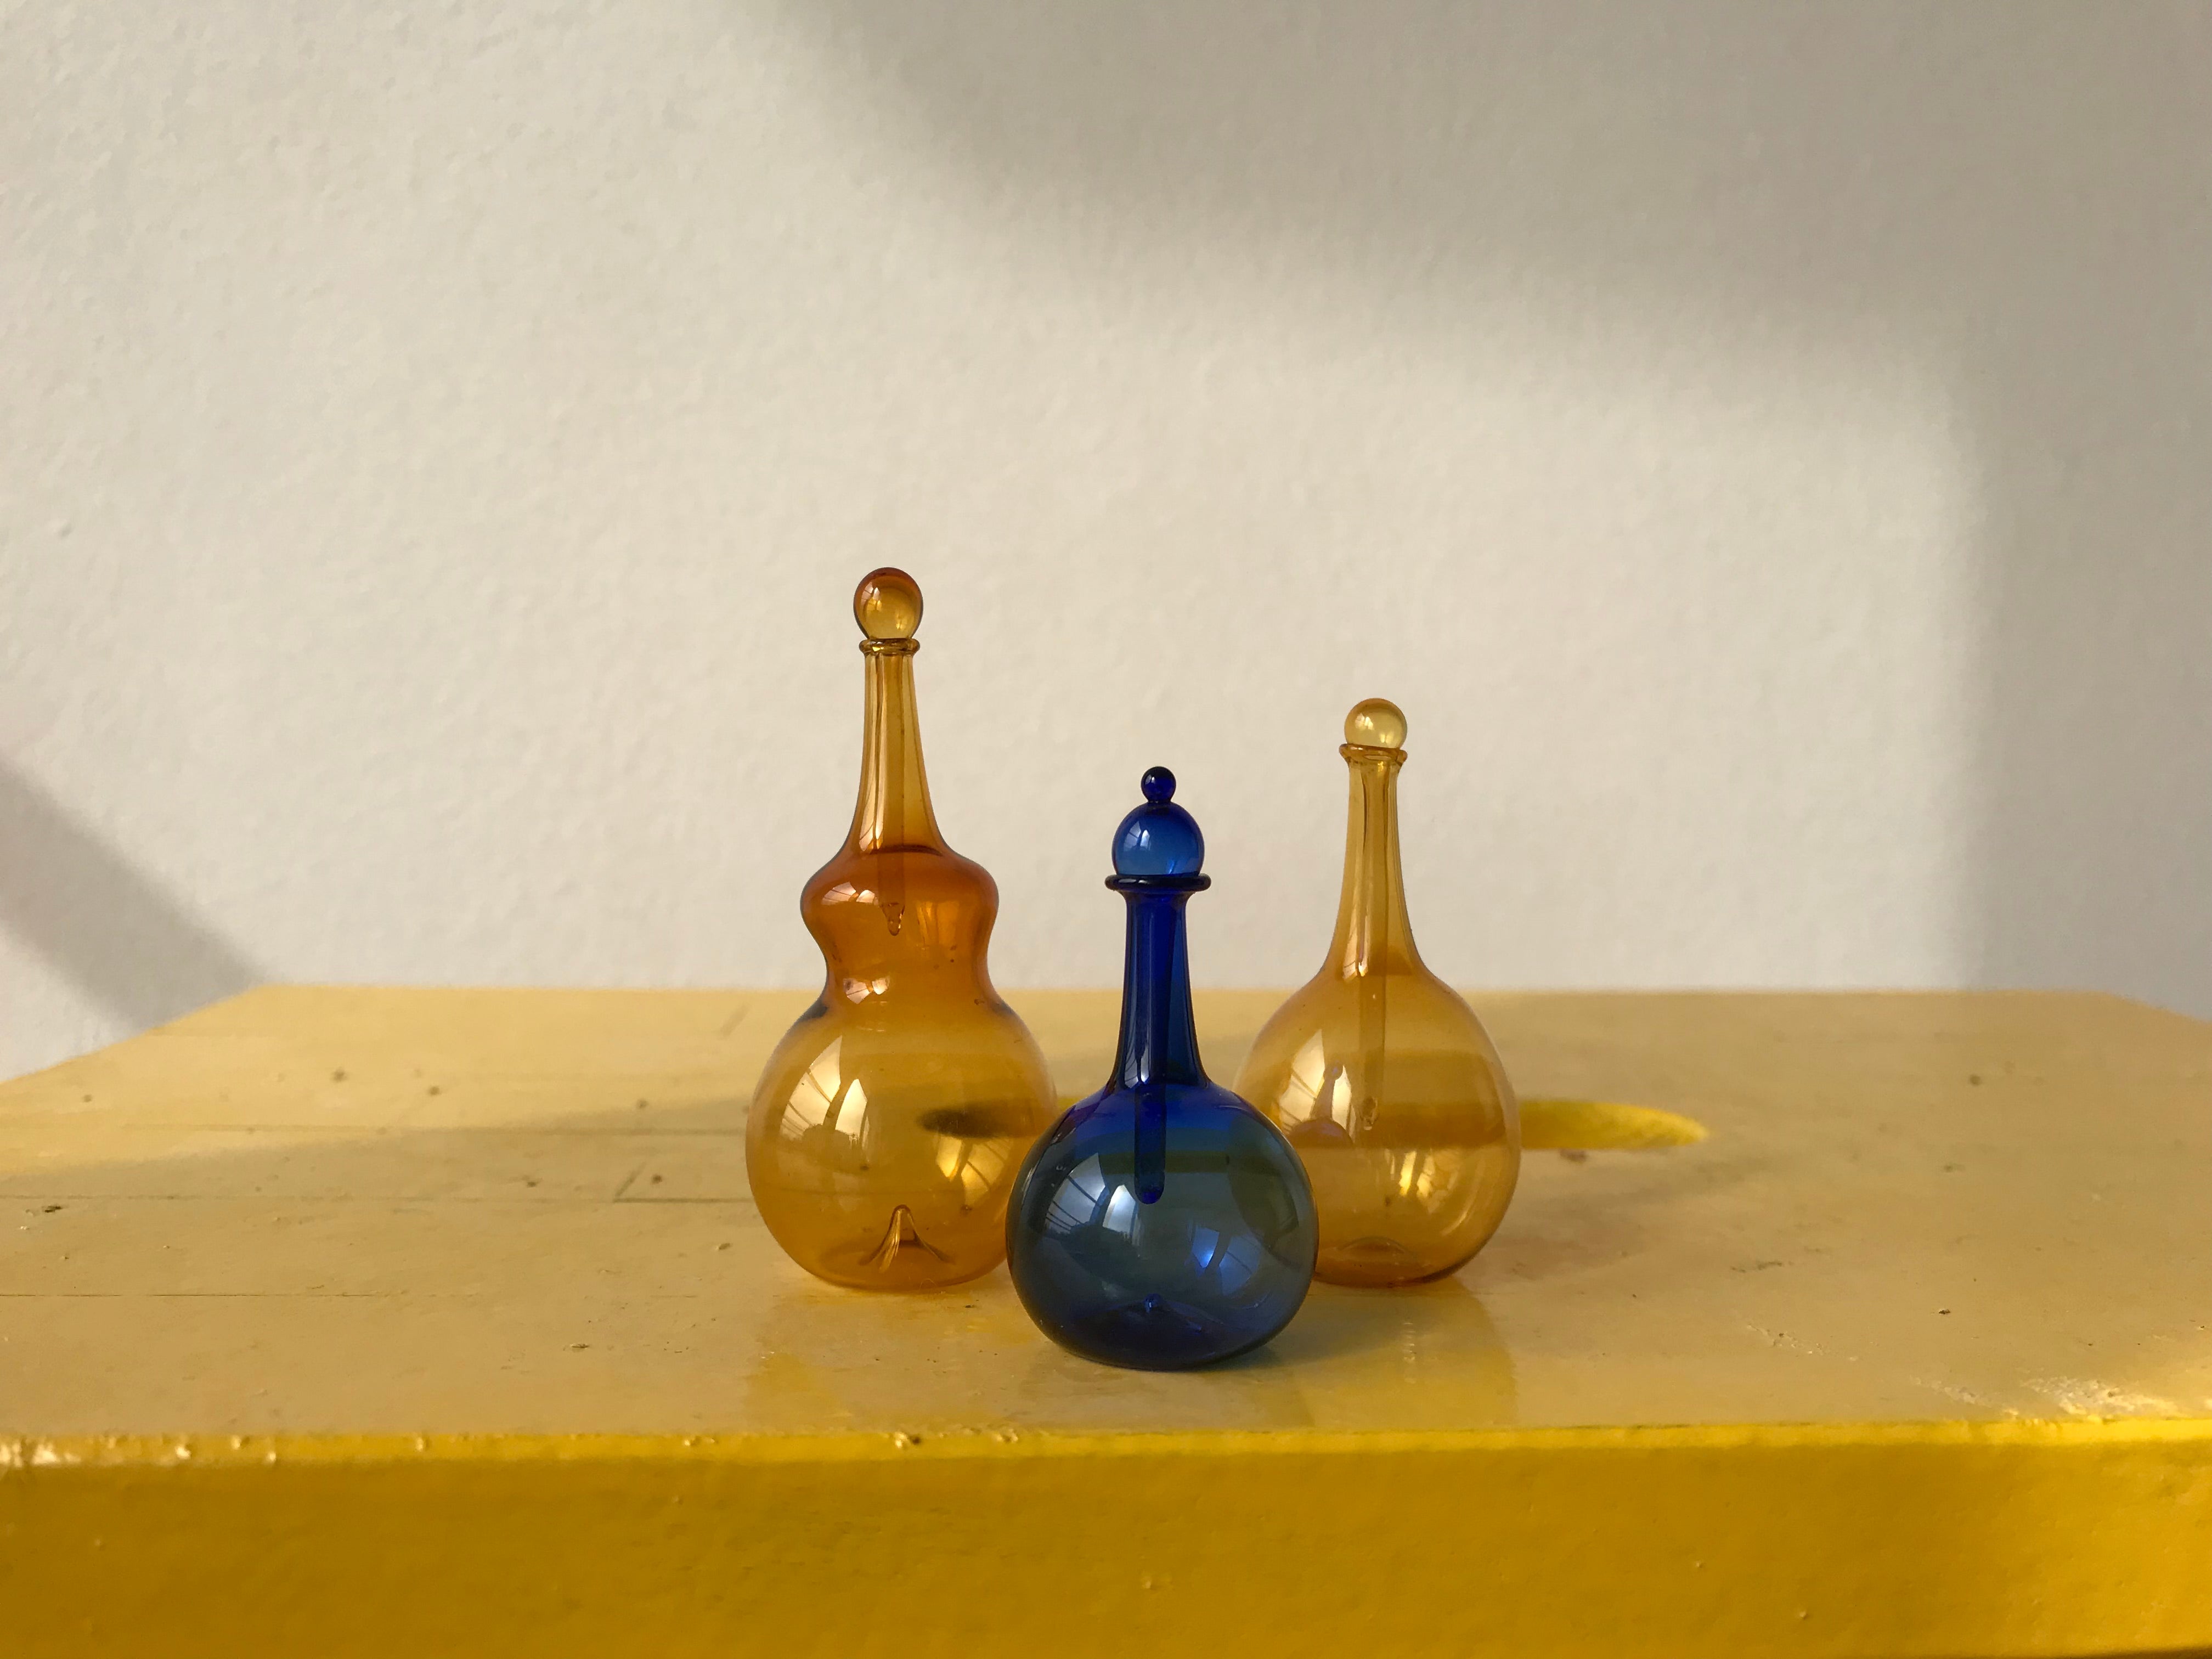 Miniature Bottles - Blue and Yellow